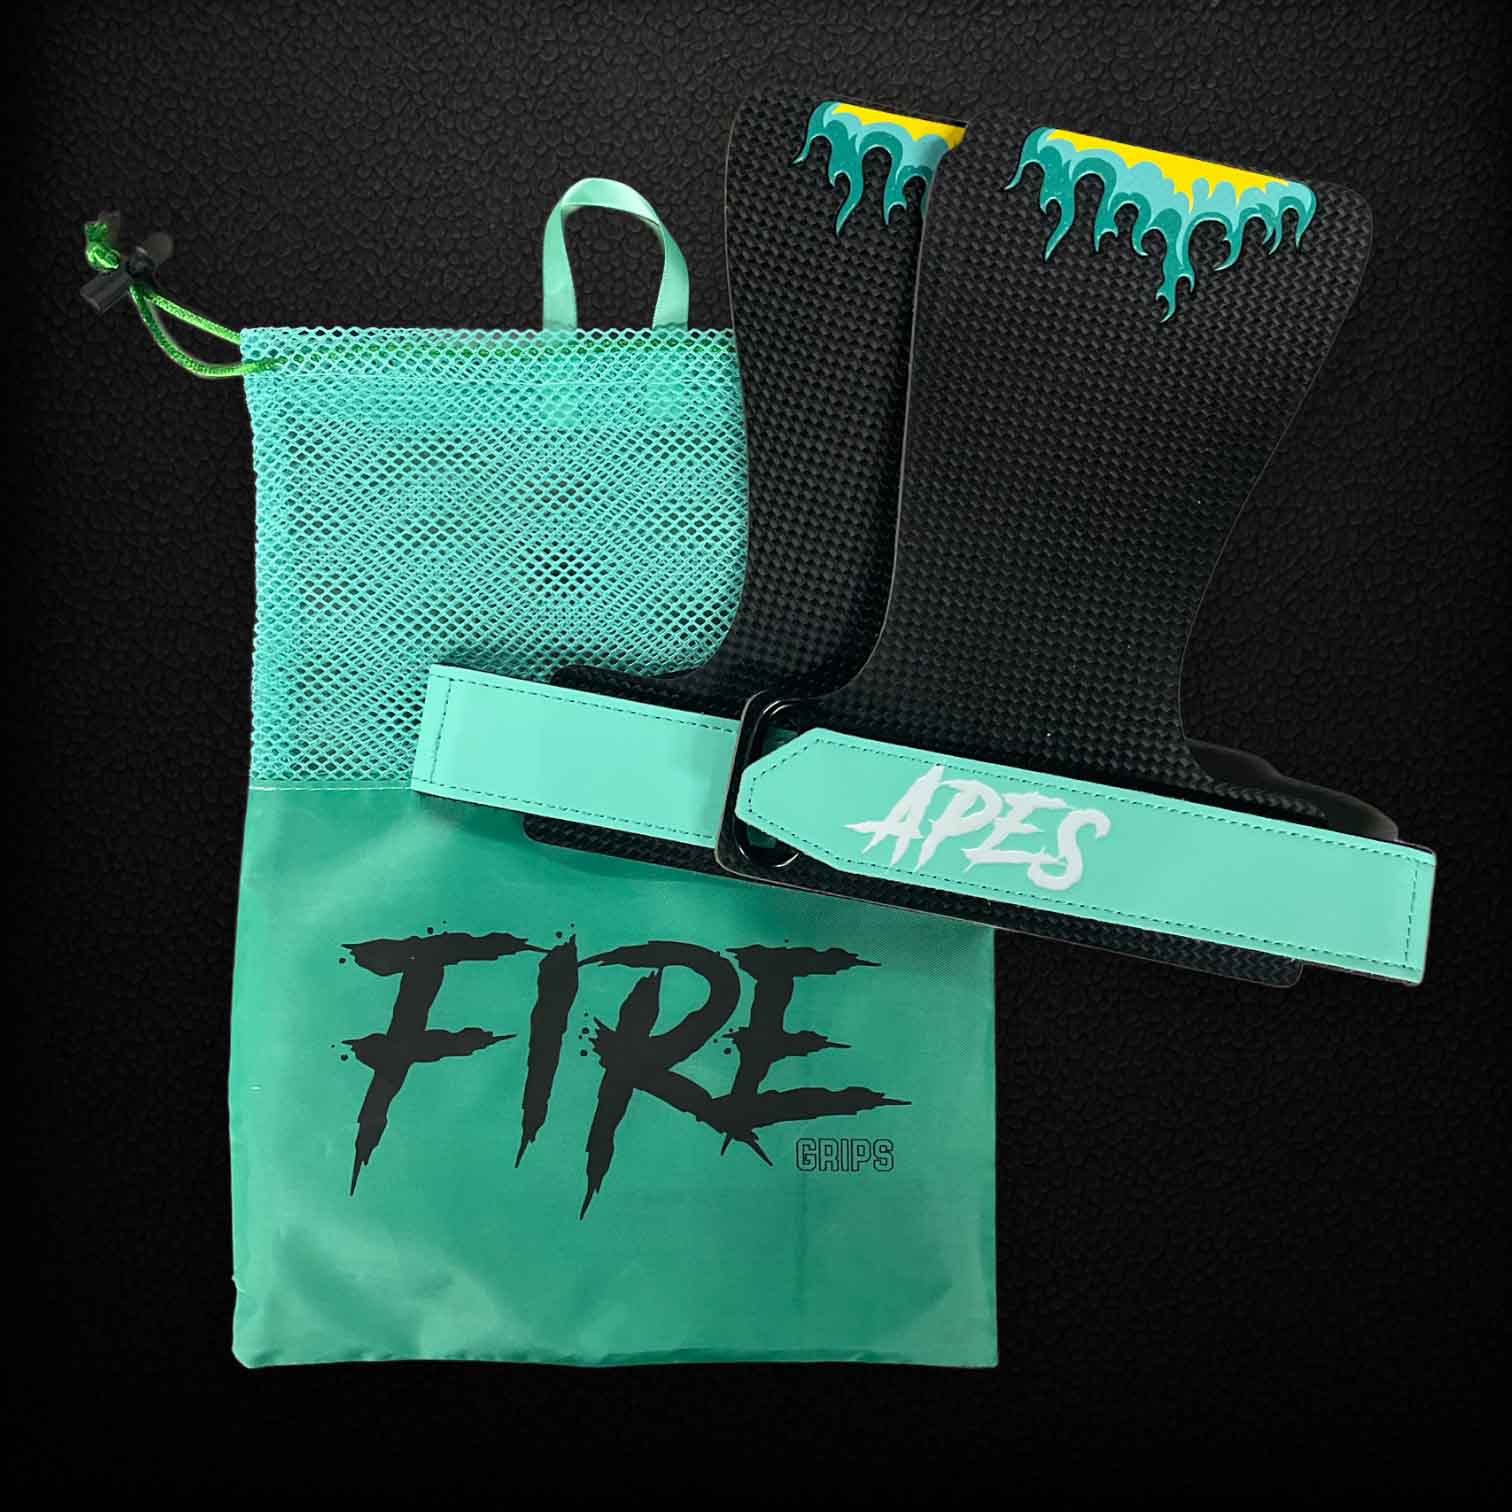 Apes Grips - Fire Grips